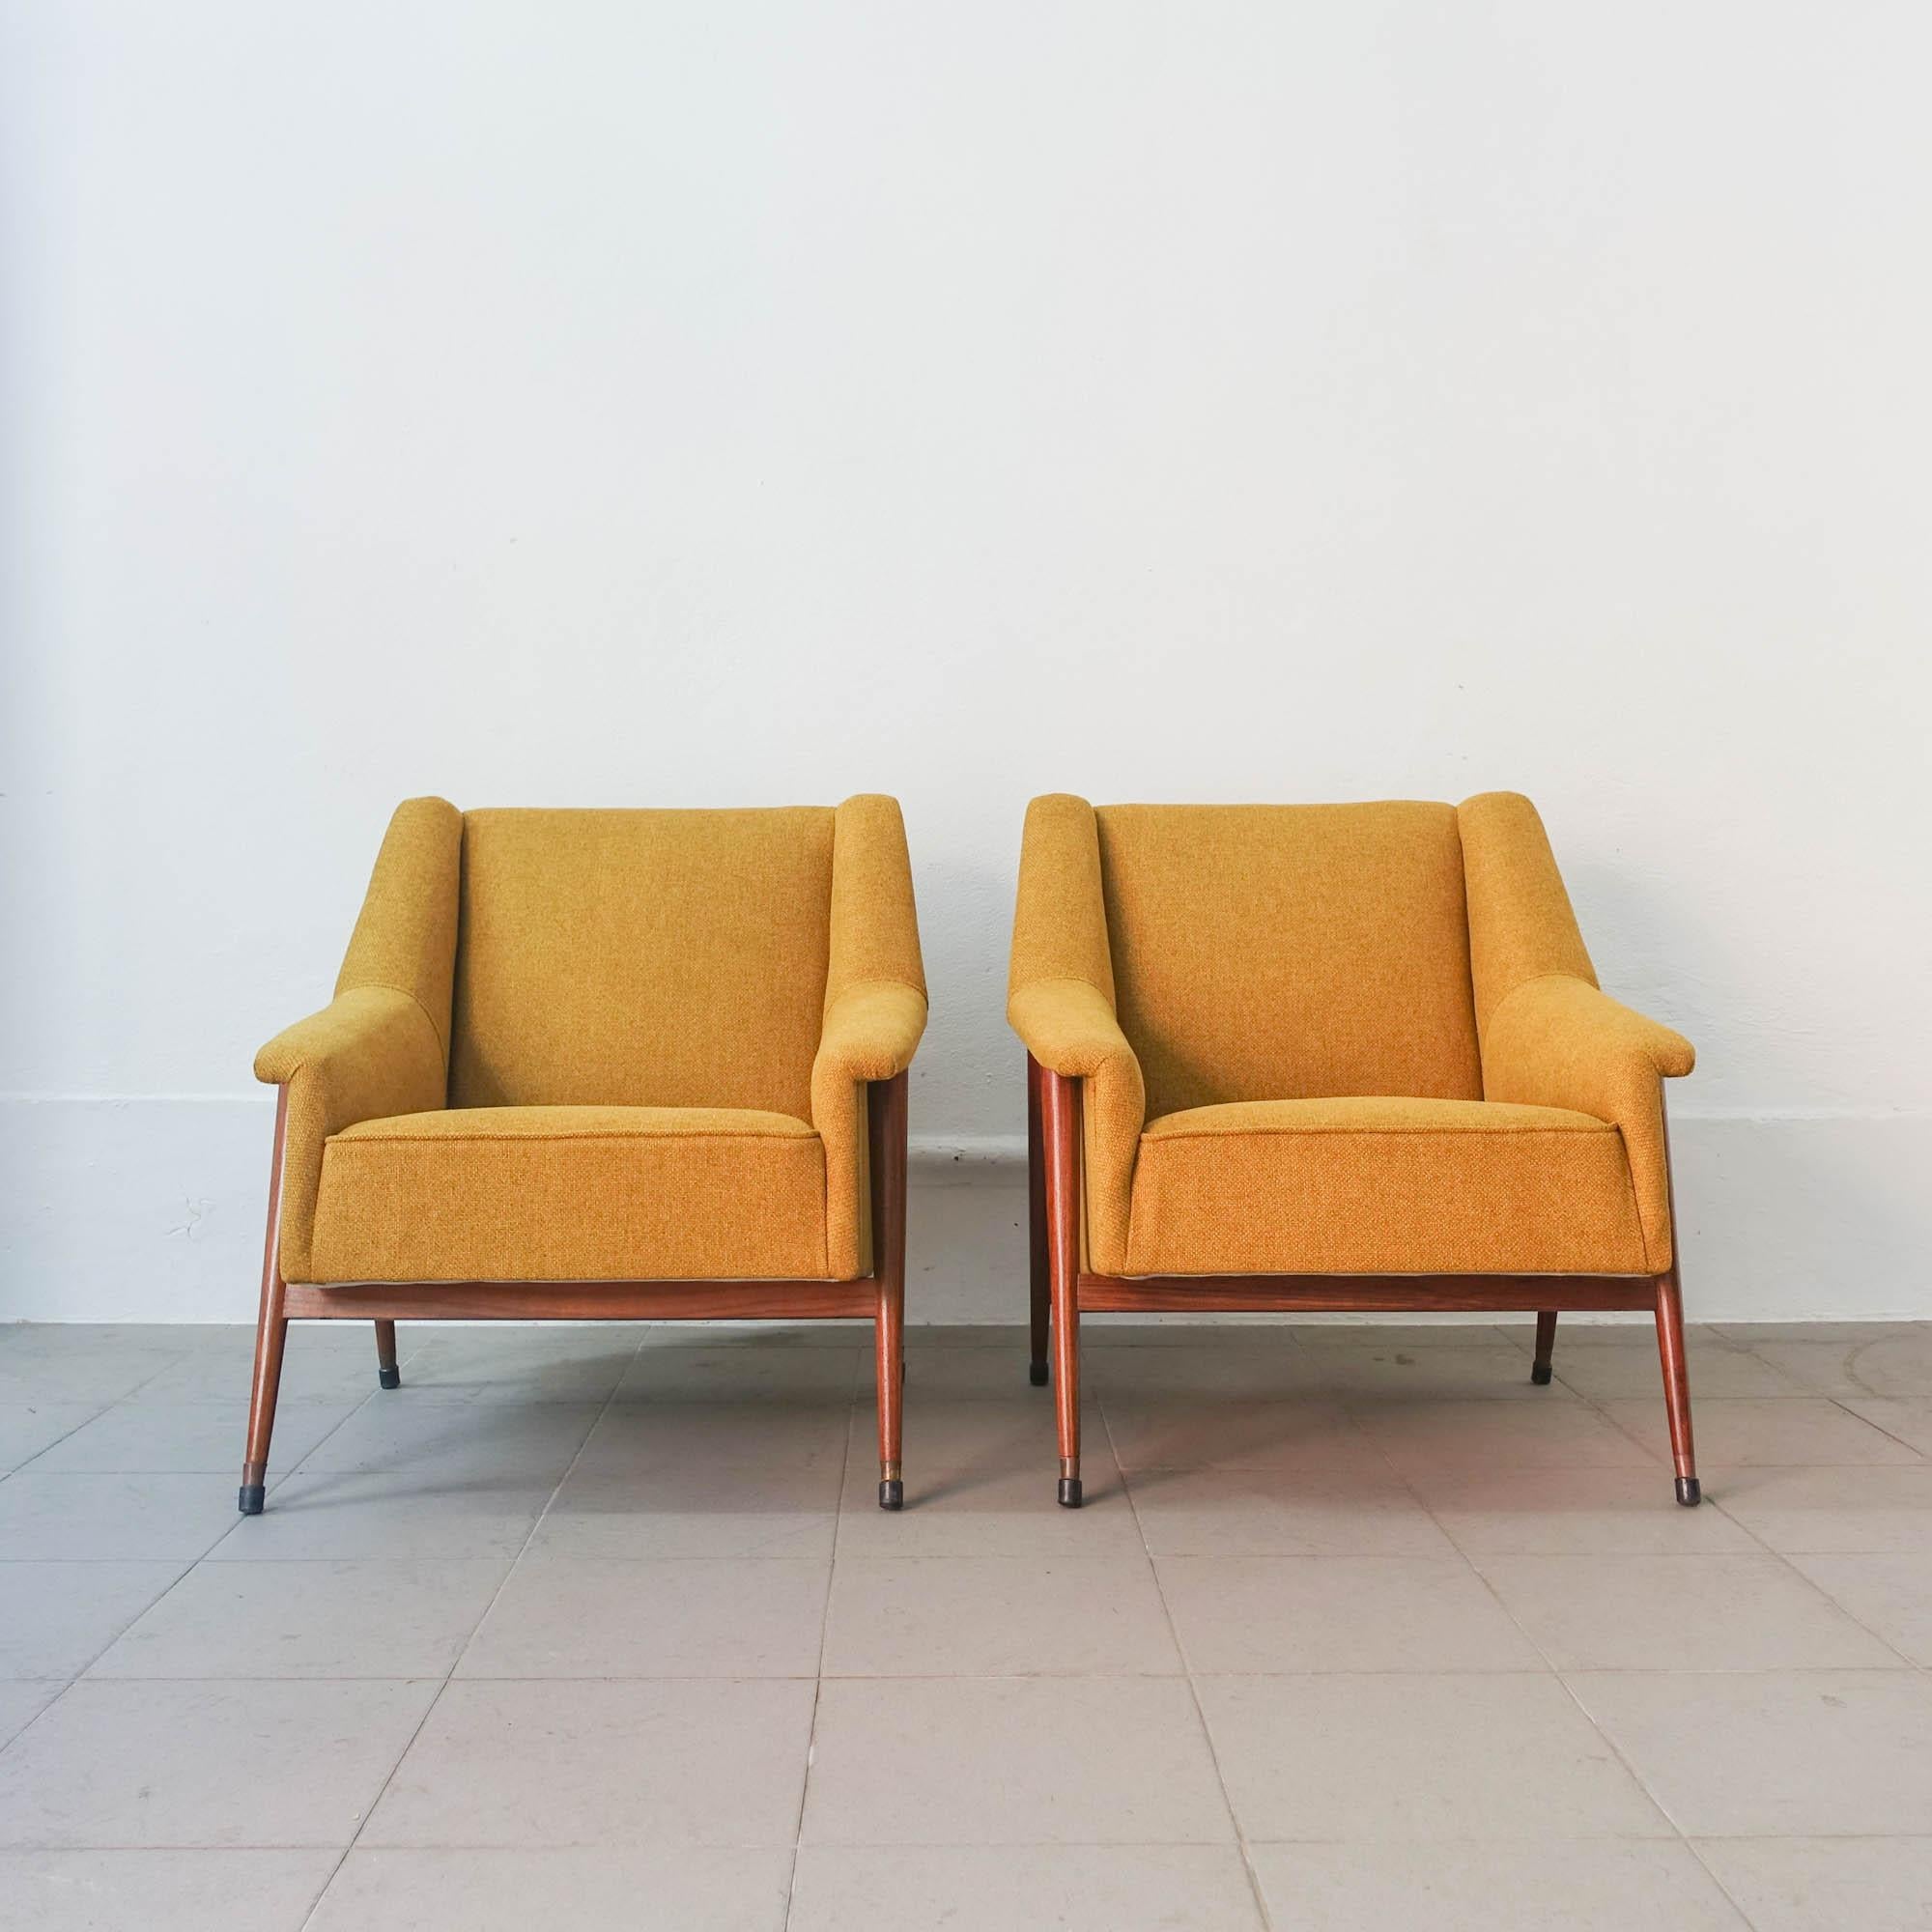 Pair of Easy Chairs, by José Espinho for Olaio, 1959 For Sale 1